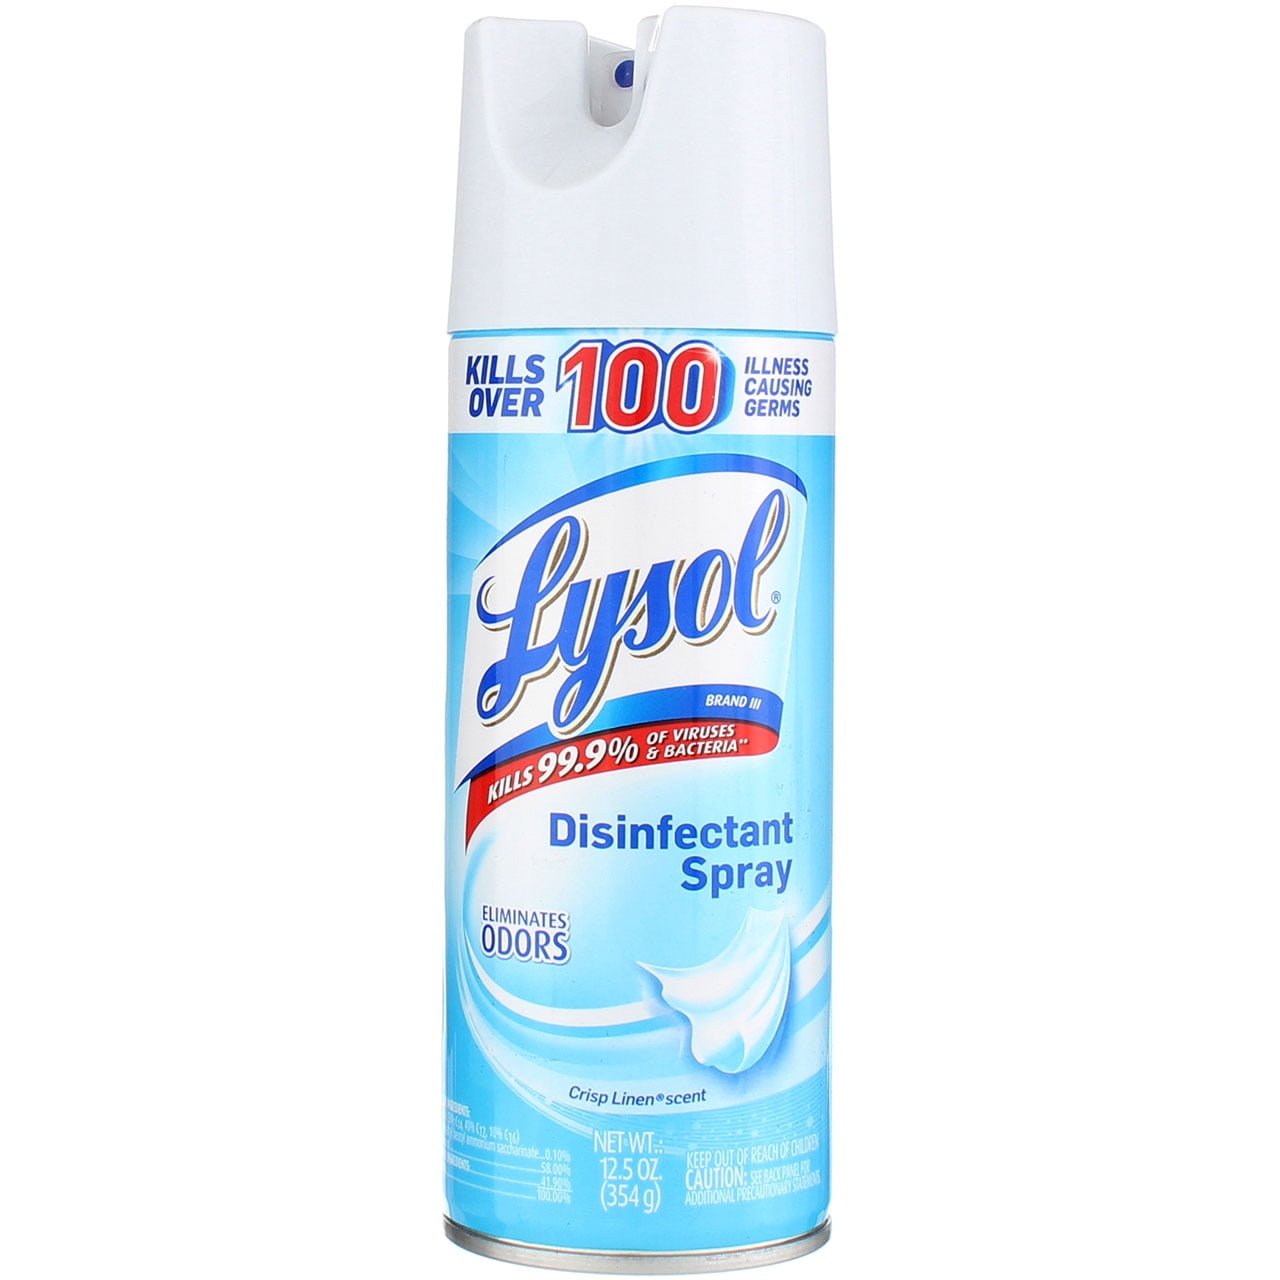 Lysol Disinfectant Spray To Go - 12 Pack (1.5 oz) – Contarmarket